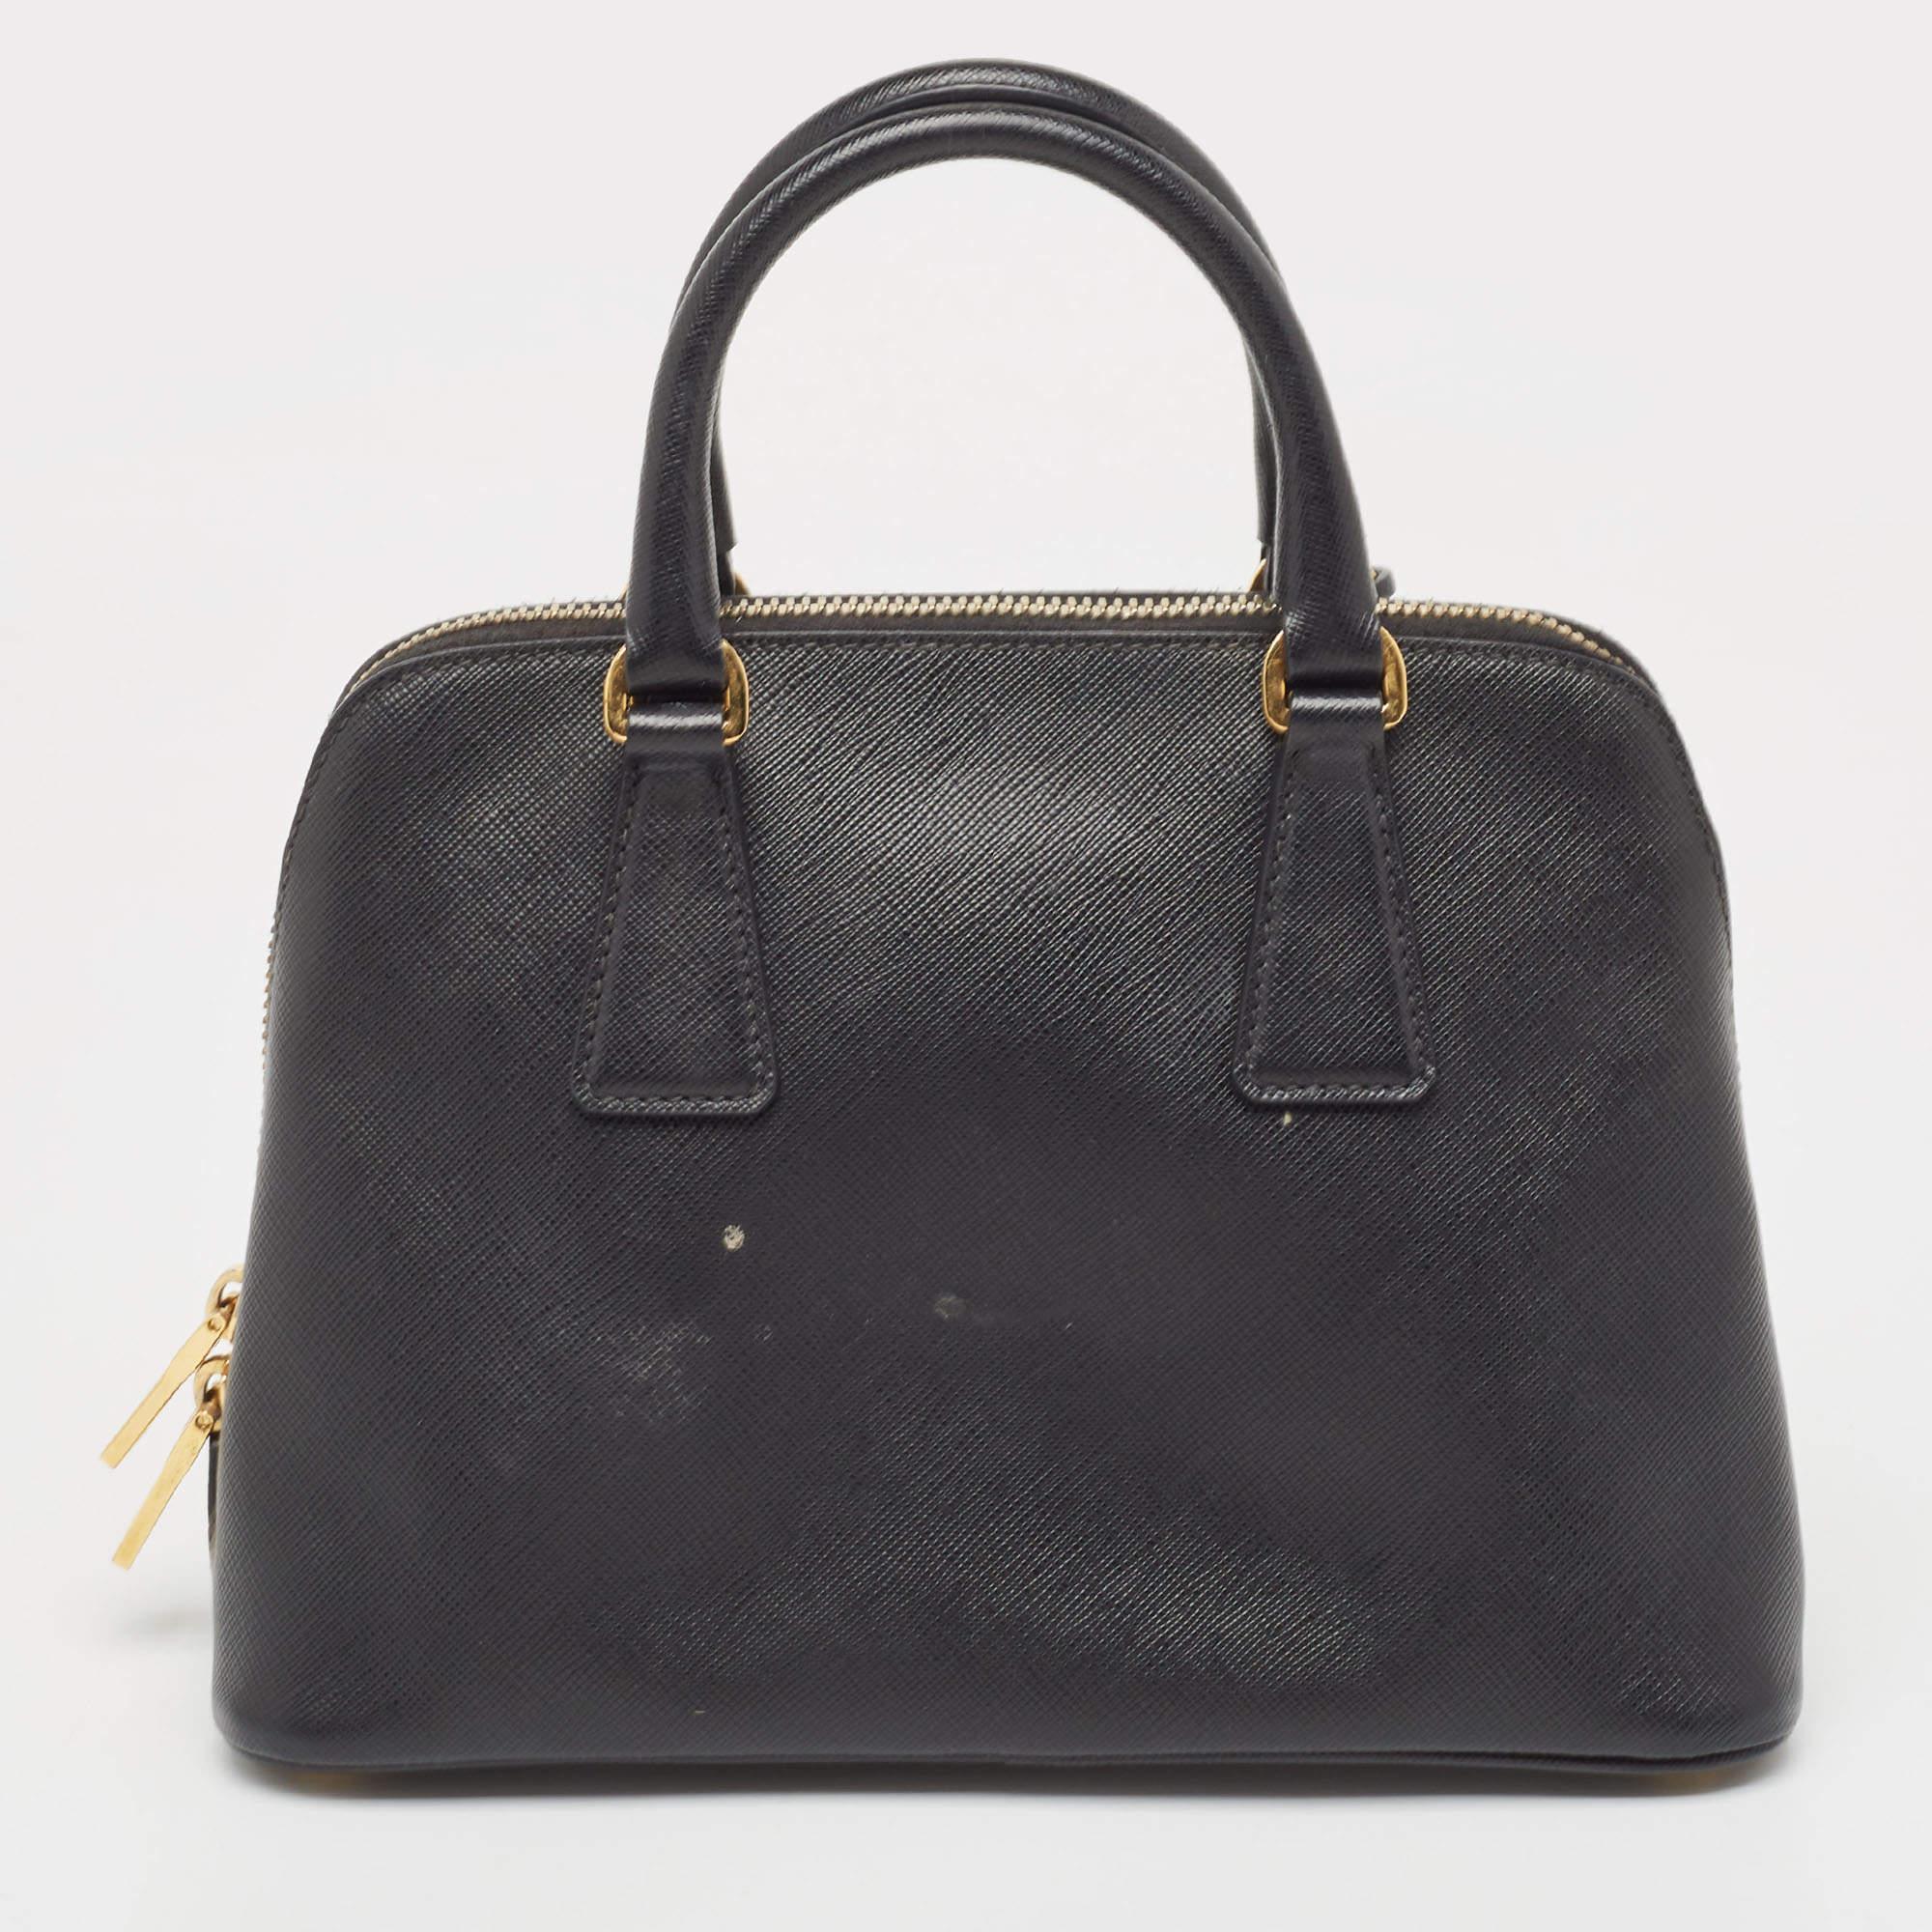 The simple silhouette and the use of durable materials for the exterior bring out the appeal of this Prada satchel for women. It features comfortable handles and a well-lined interior.

Includes: Authenticity Card, Info Booklet, Detachable Strap

